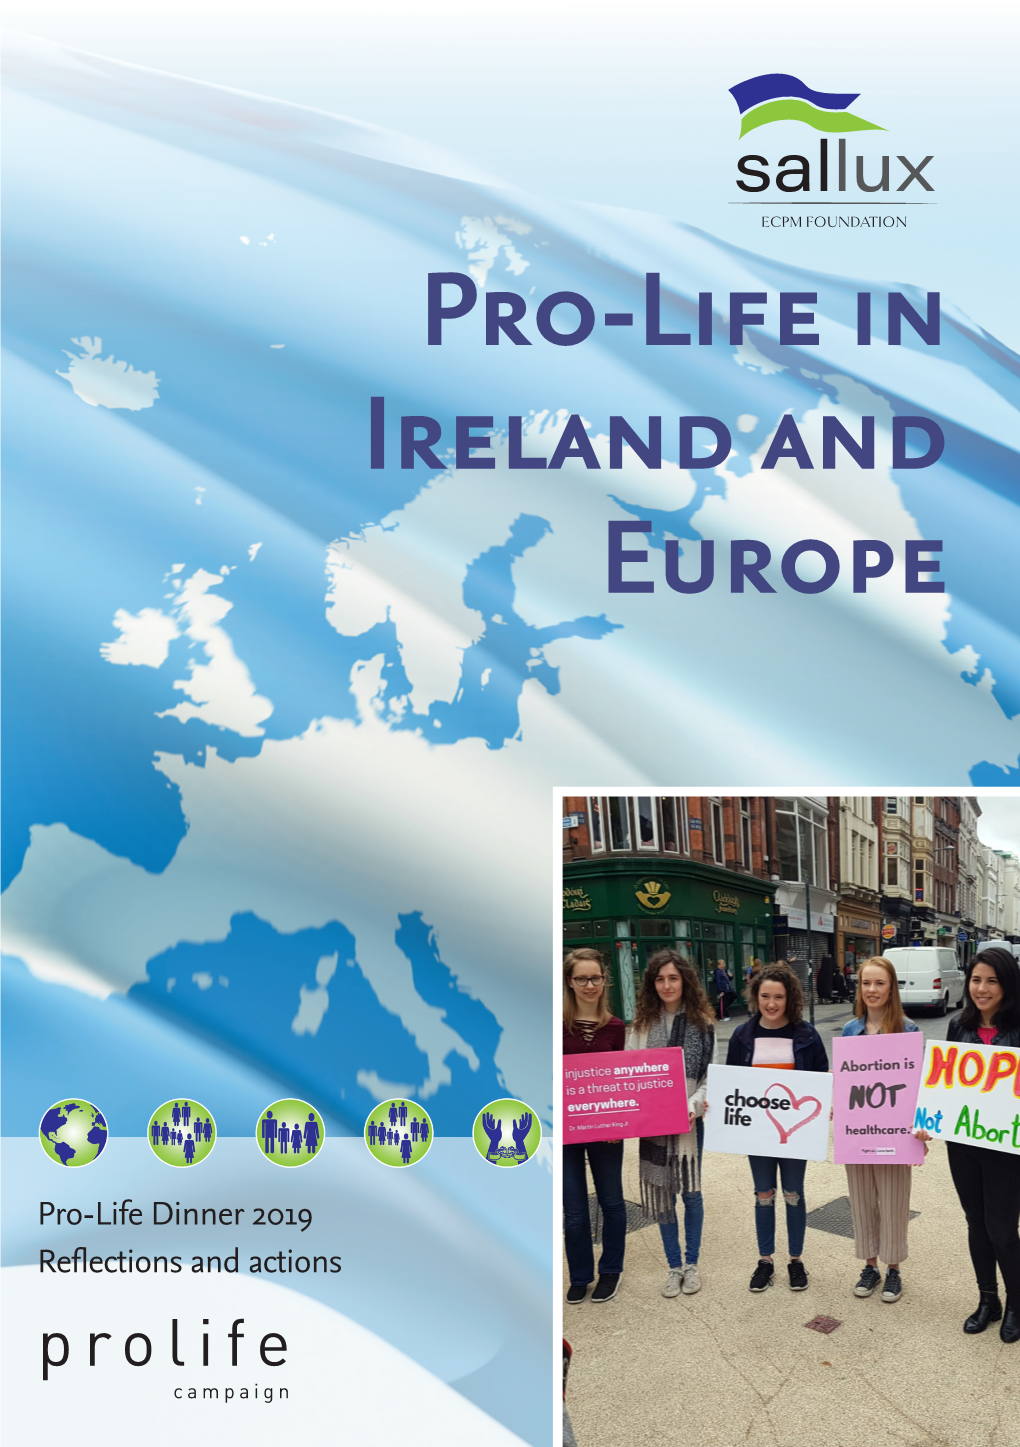 Pro-Life in Ireland and Europe